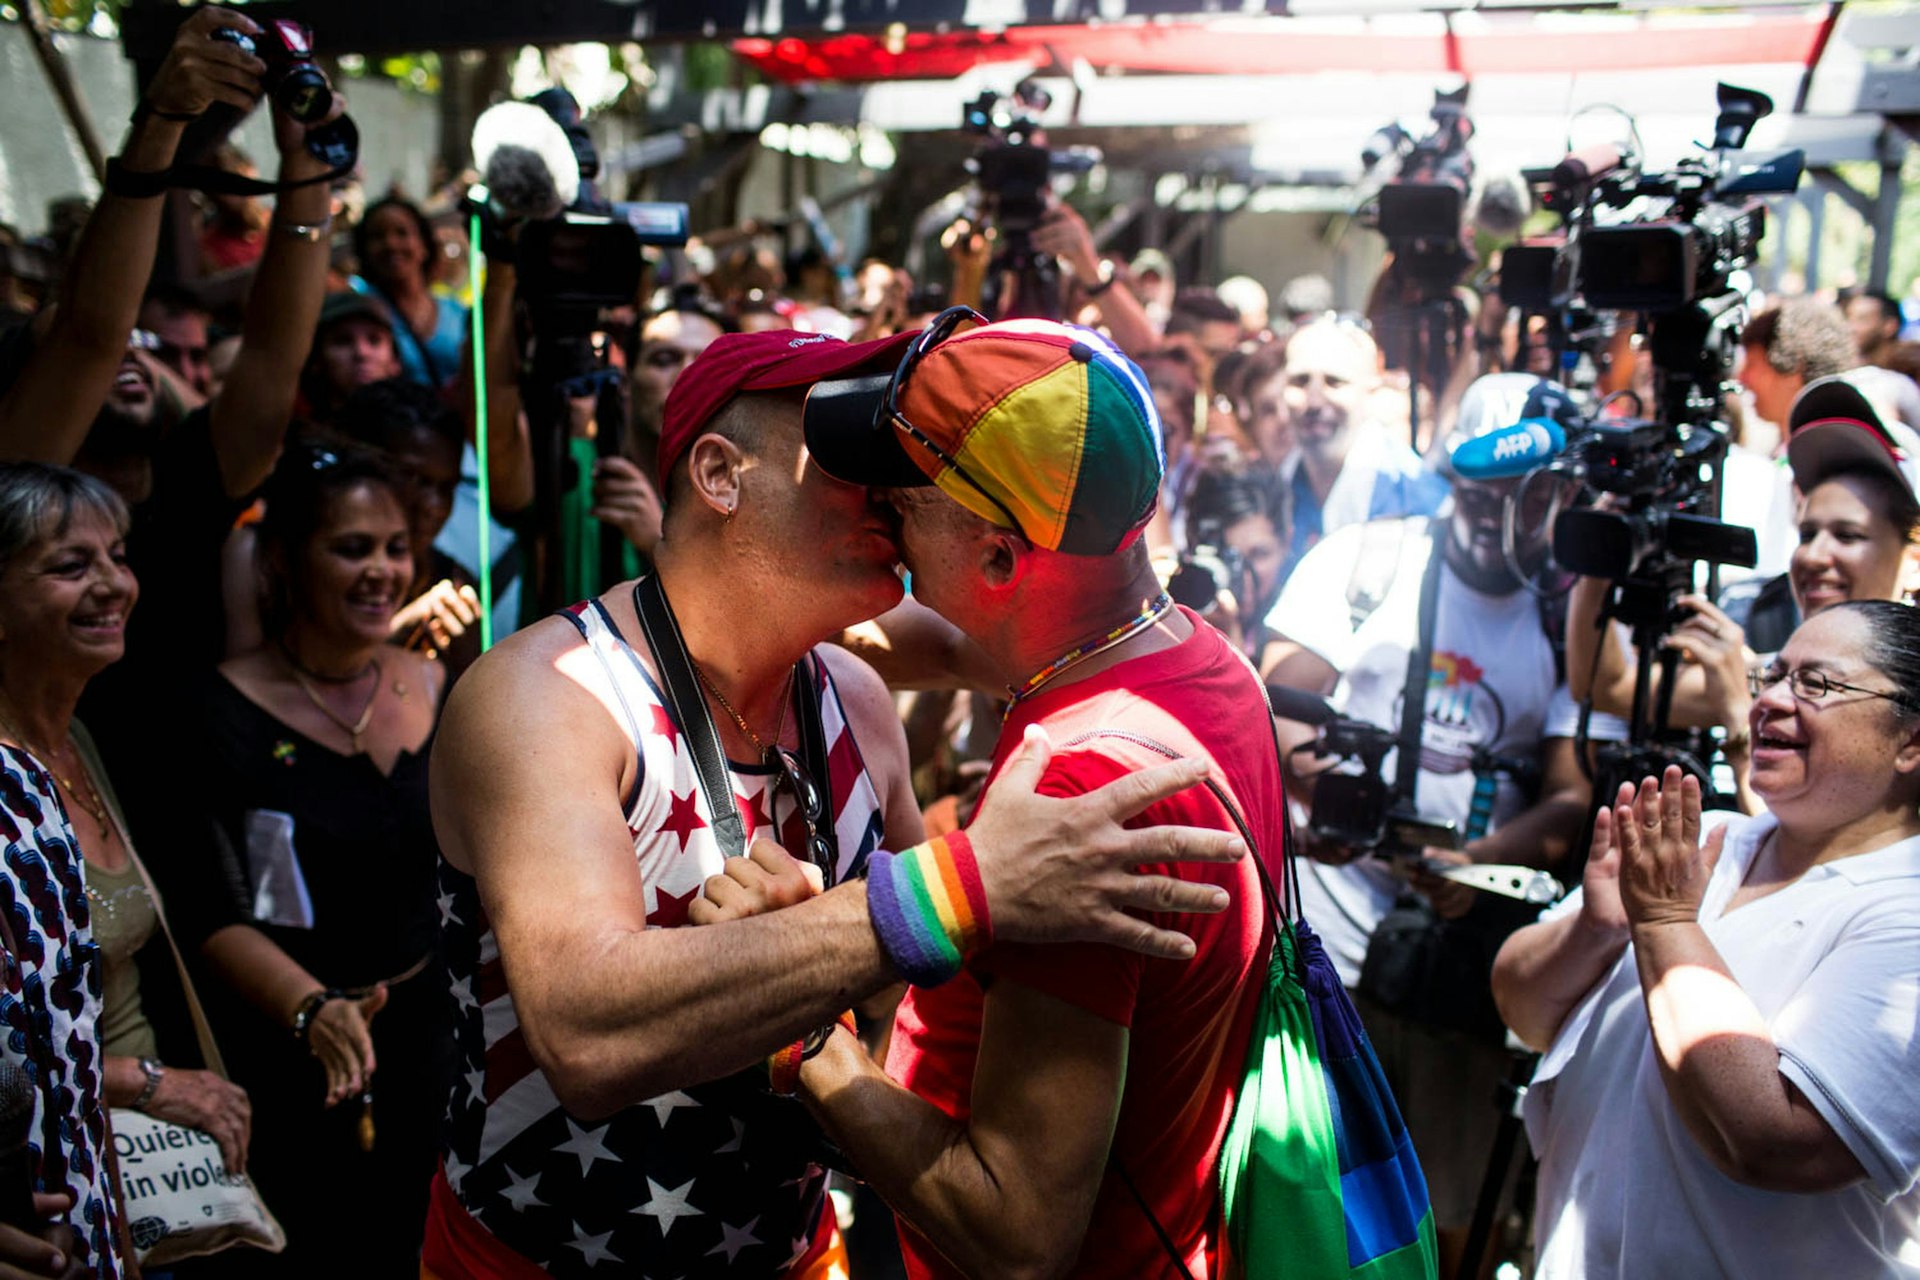 All over Latin America have come to bless unofficial same-sex marriages.